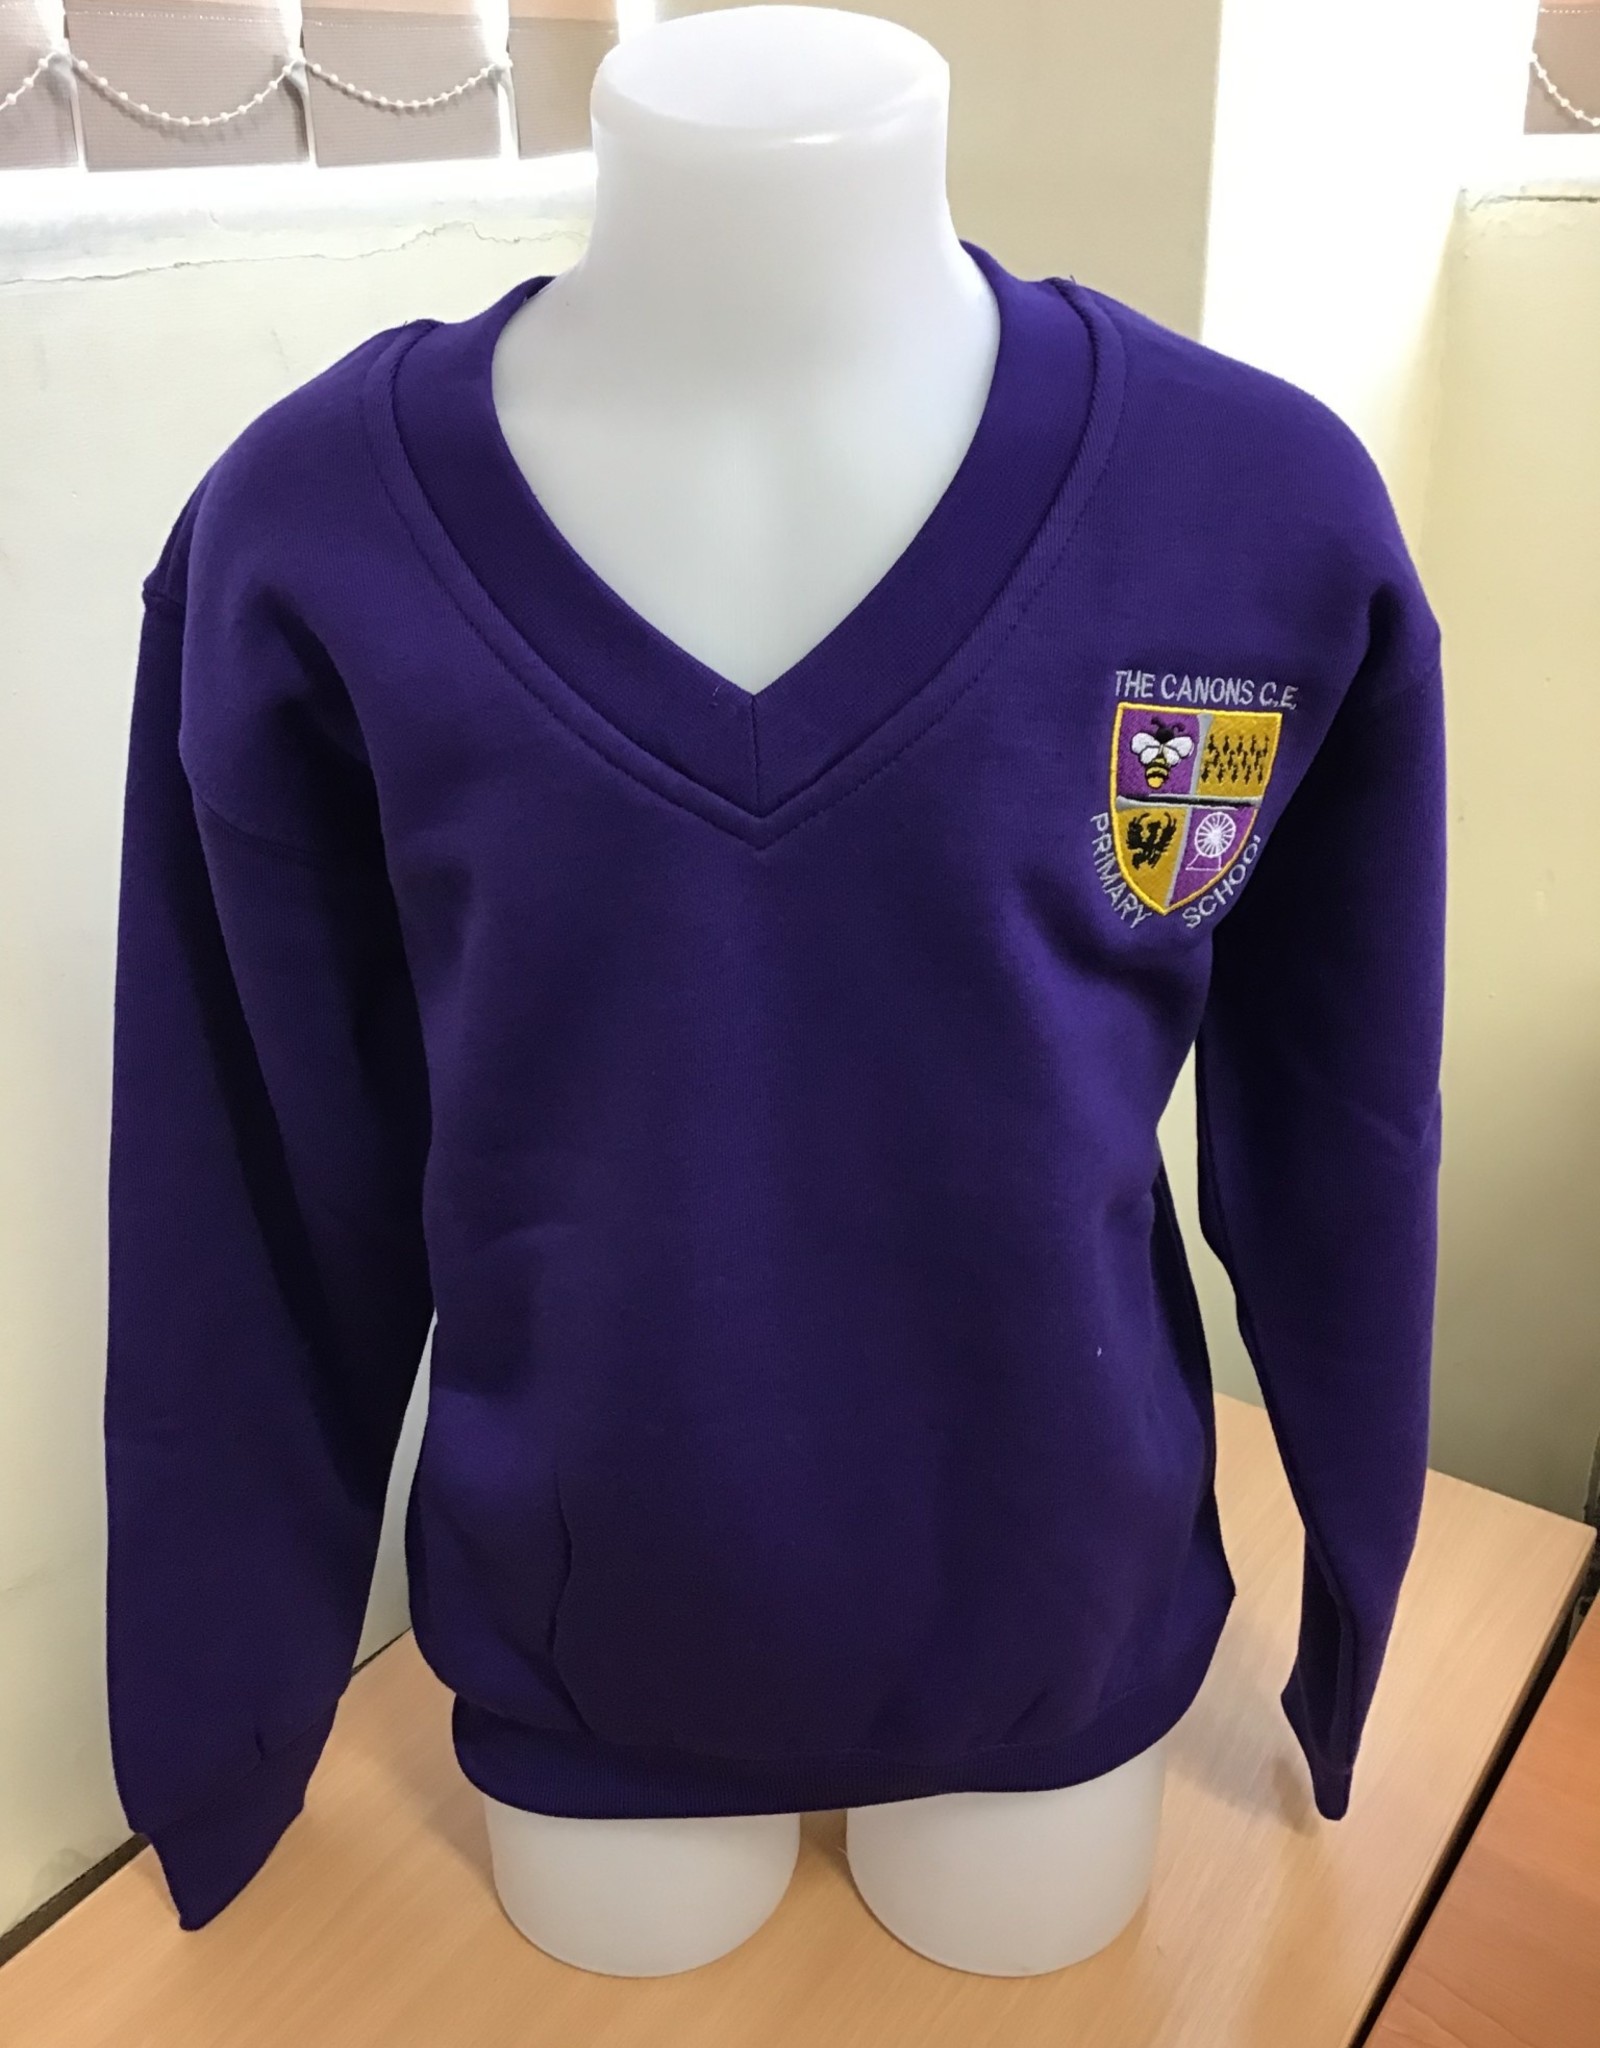 V-Neck Sweatshirt Adult Size - The Canons CE Primary School